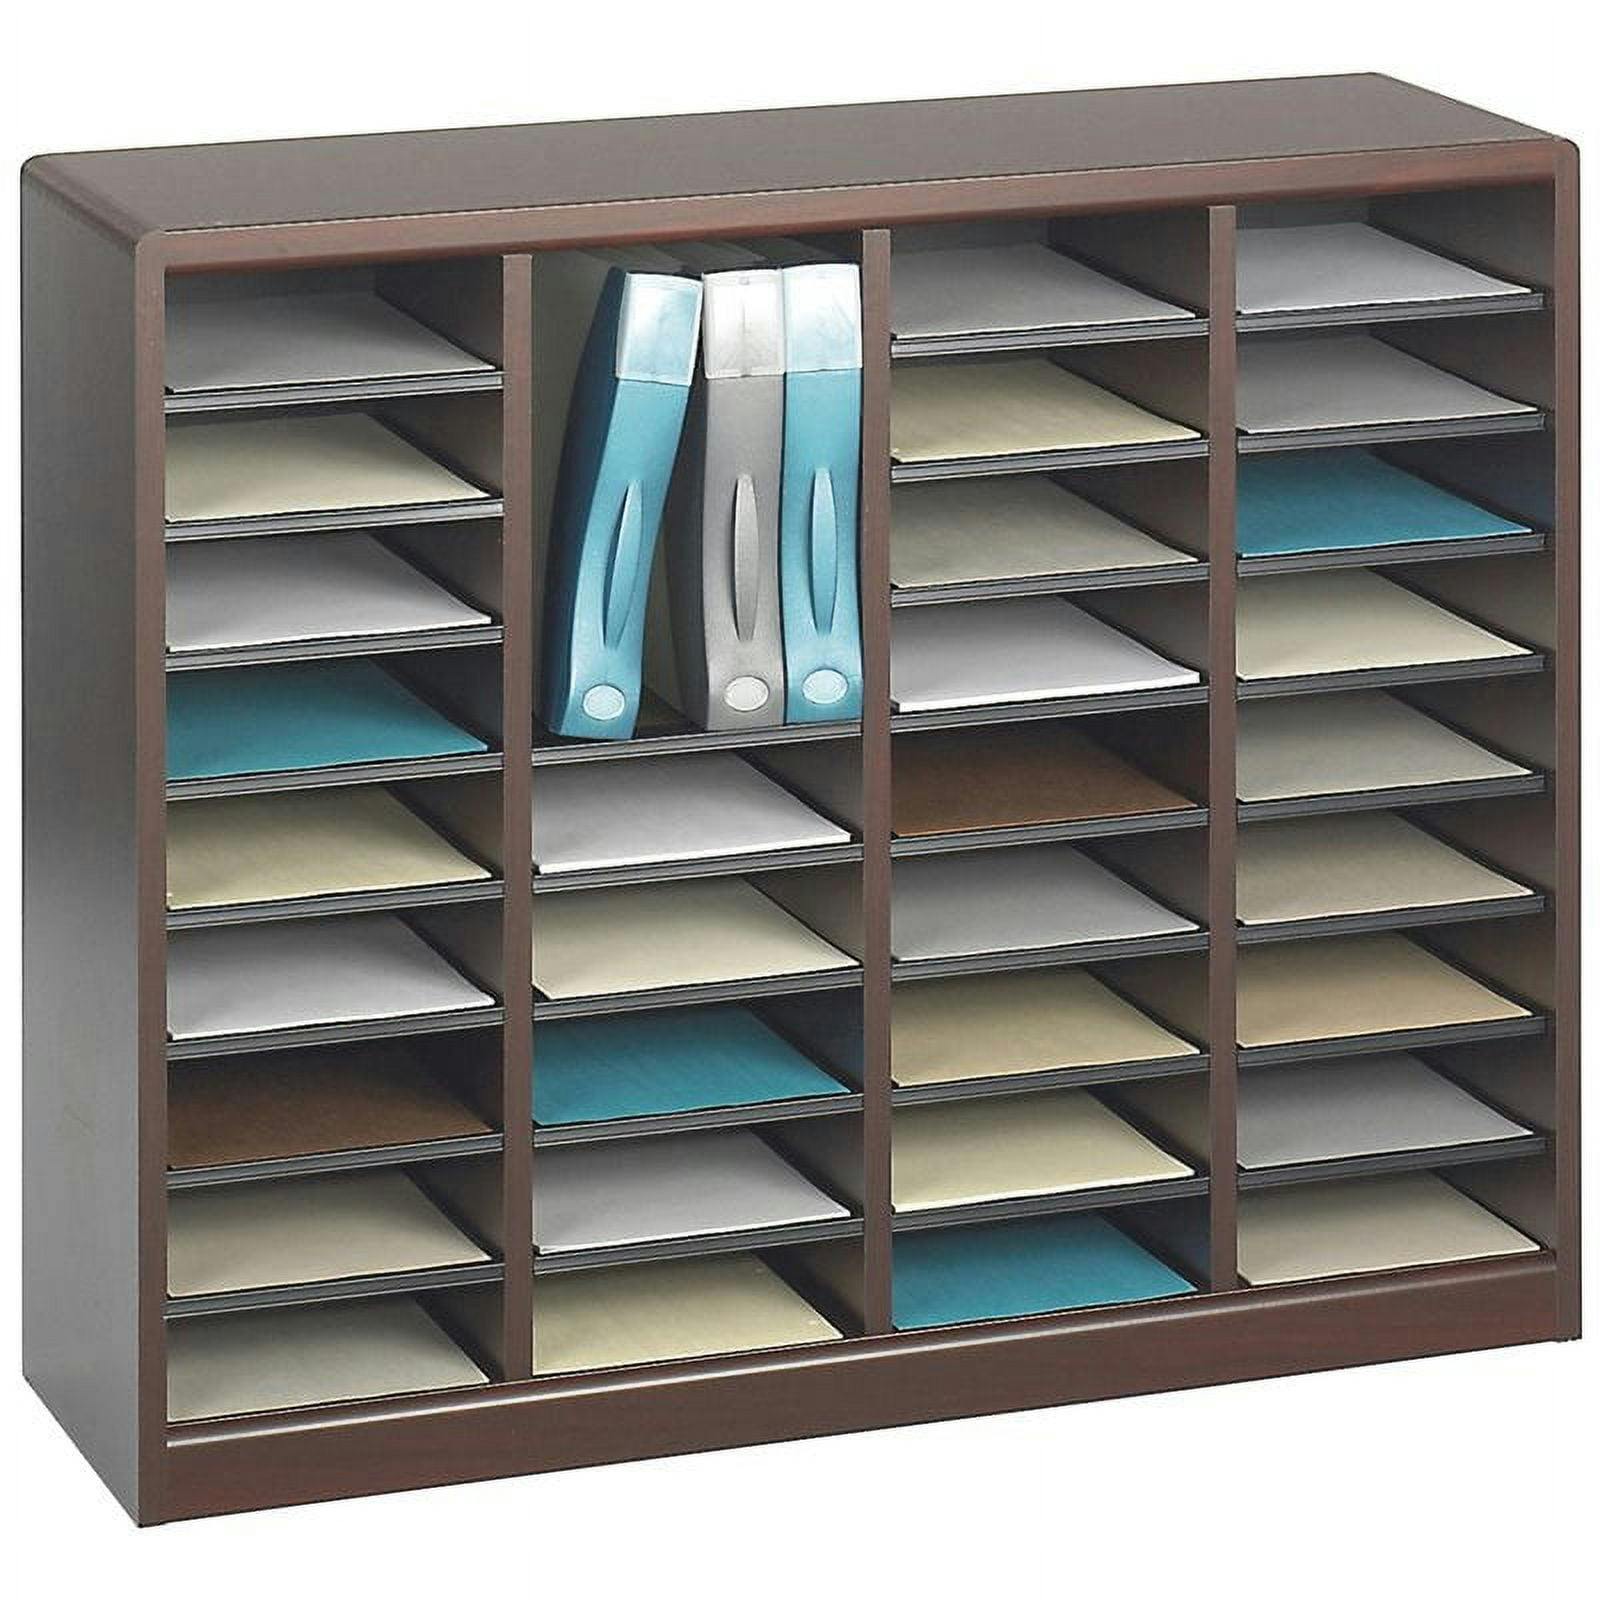 Mahogany 36-Compartment Literature Organizer with Label Holders